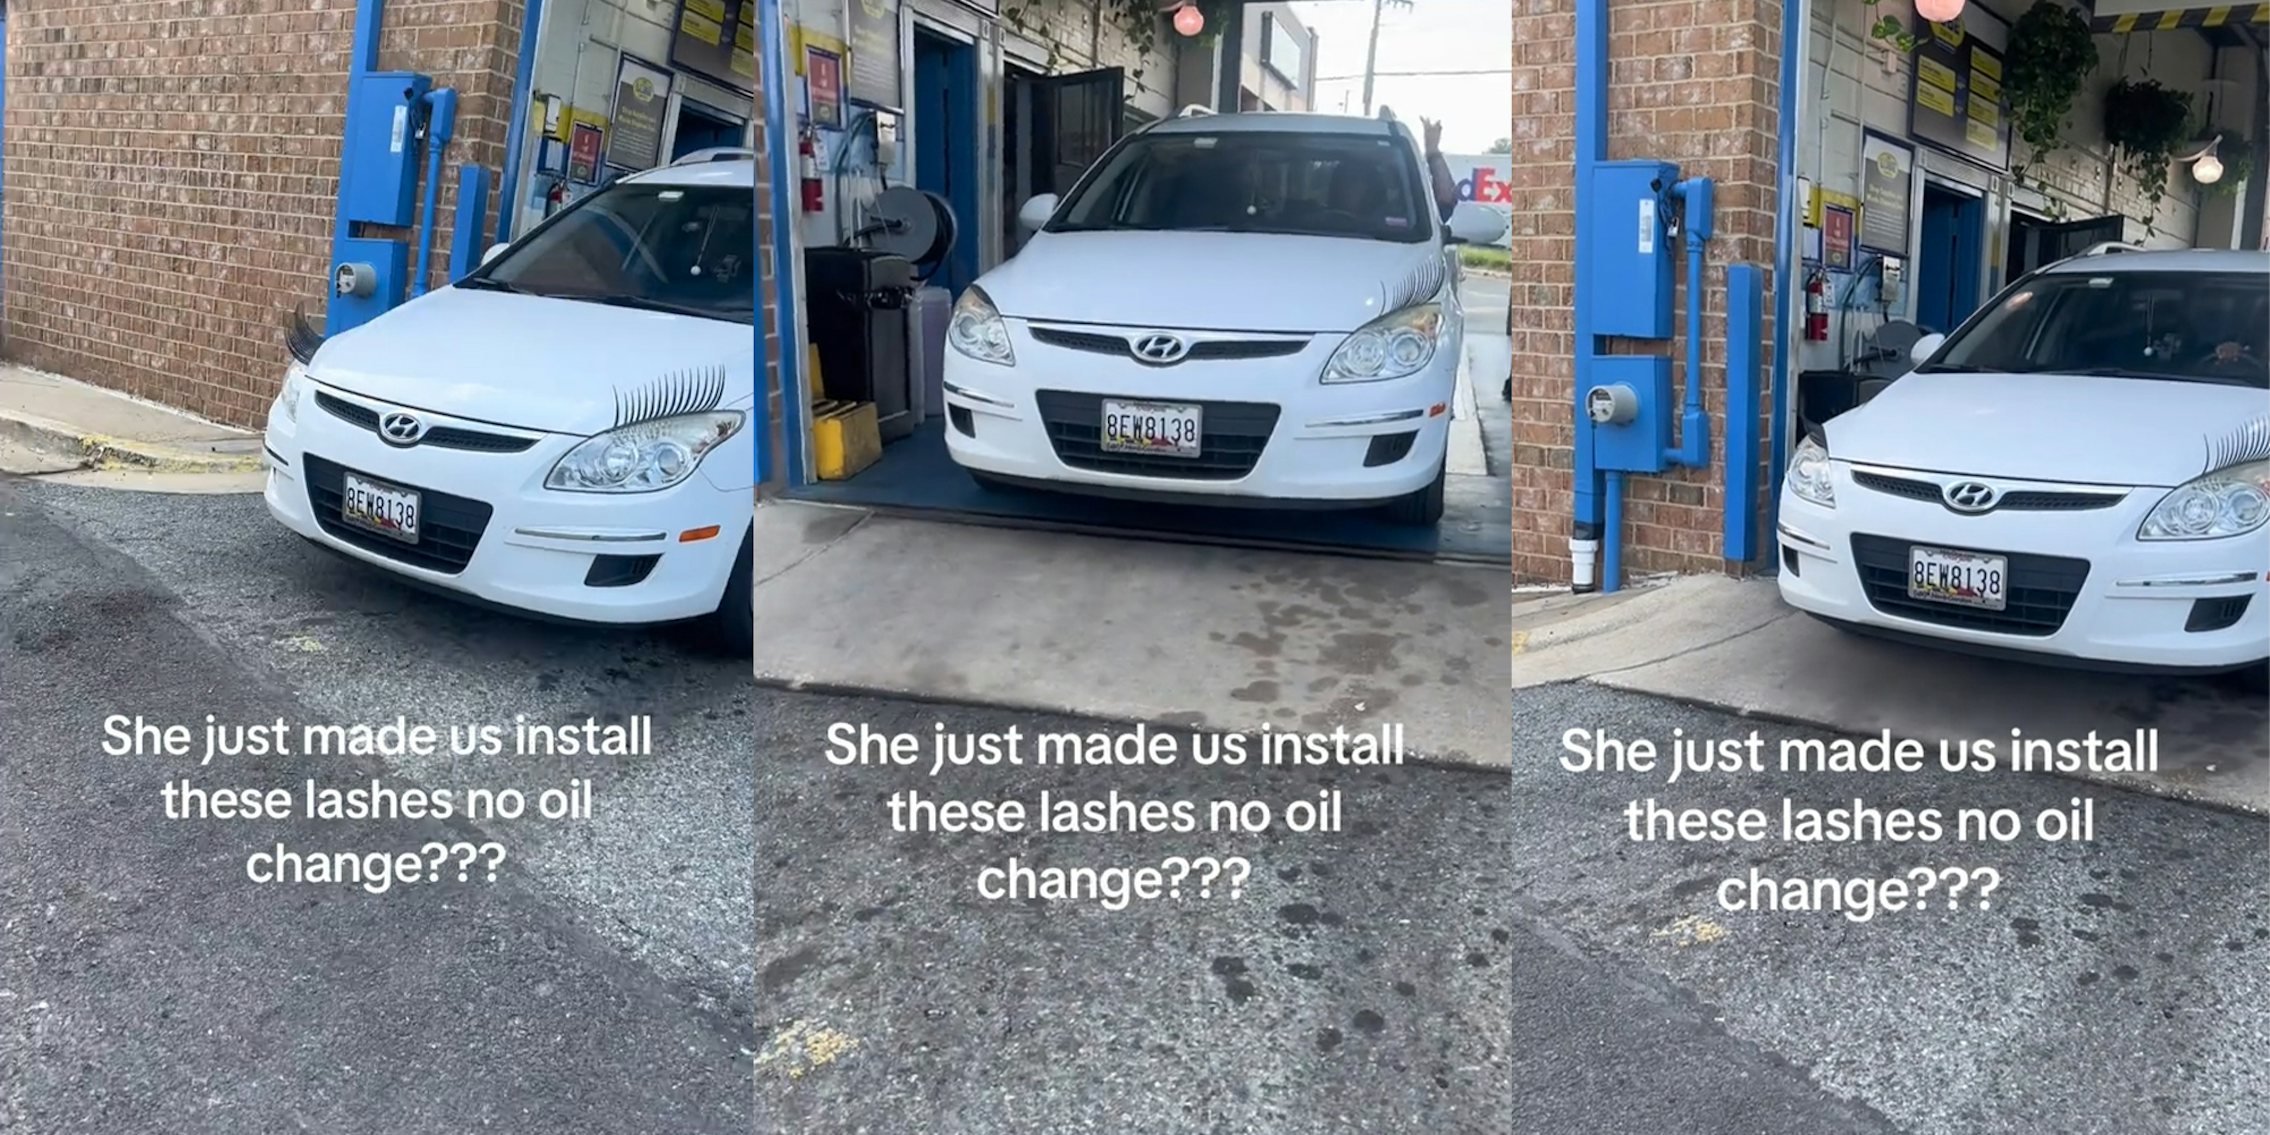 Woman Goes In for Oil Change. She Asks for Eyelashes Instead